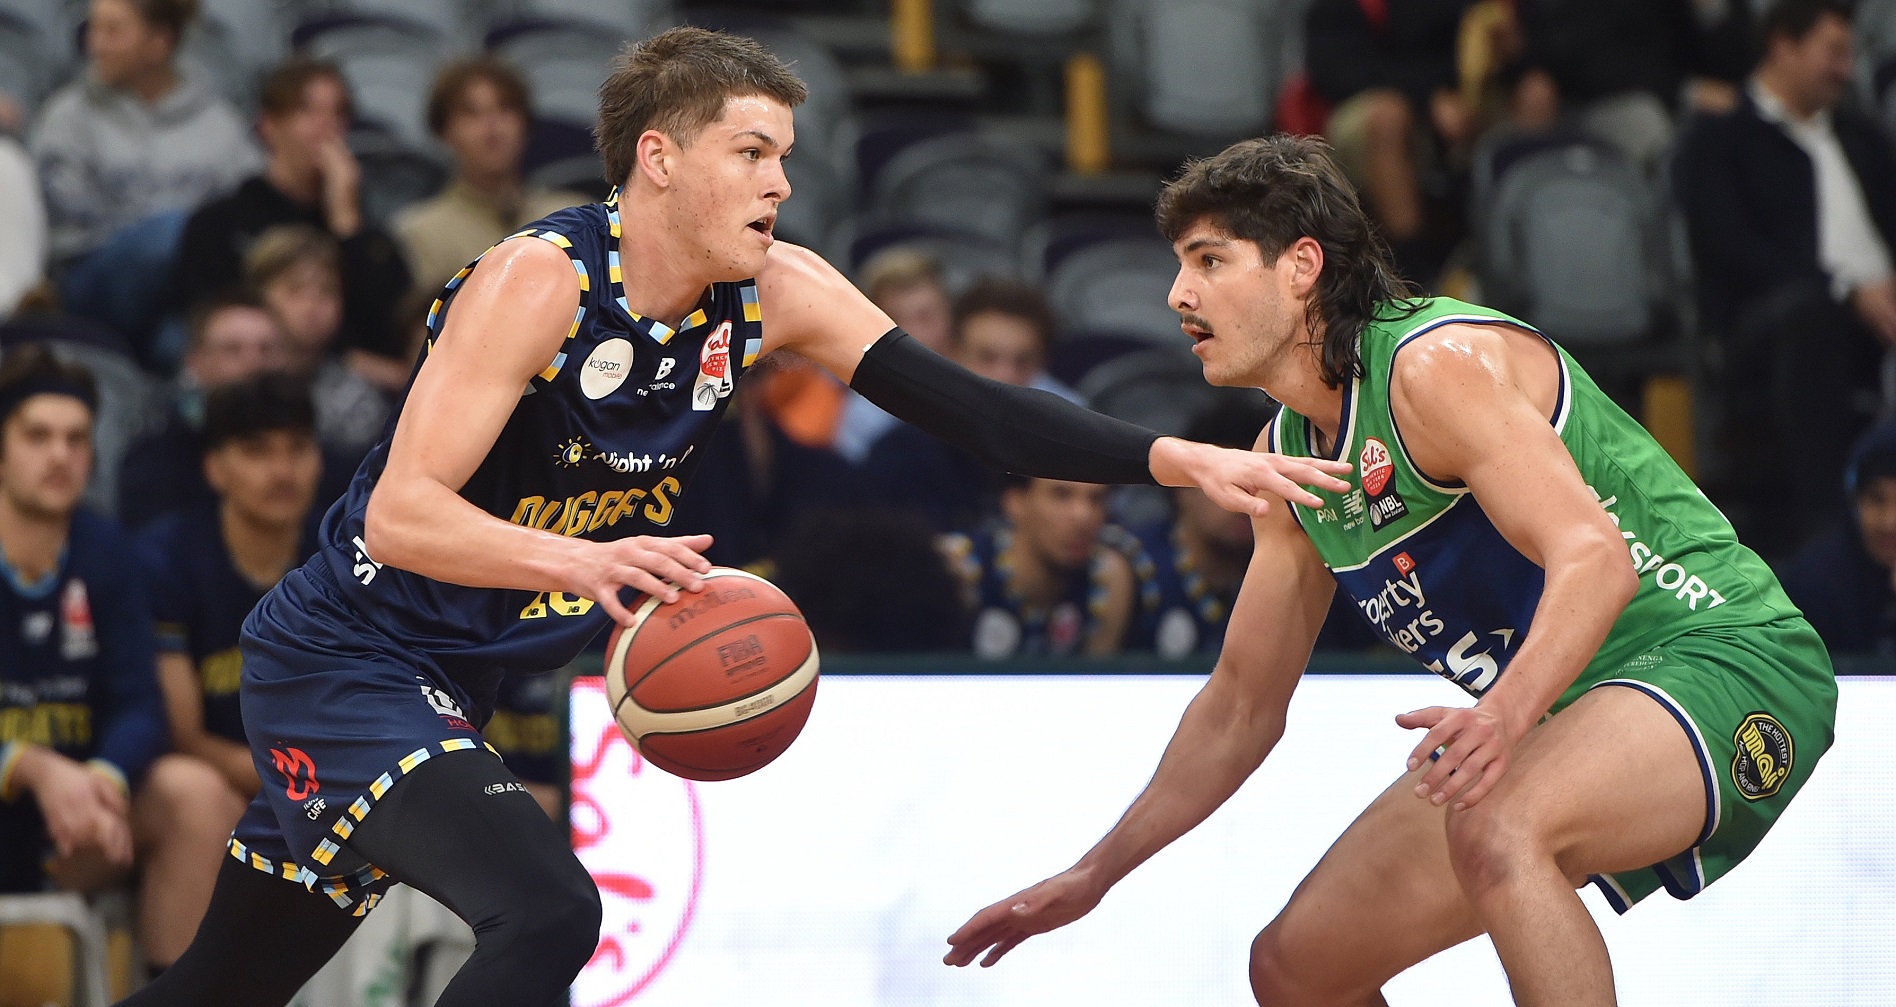 Ben Henshall, of the Otago Nuggets (left), tries to get past Manawatu Jets player Liam Judd in...